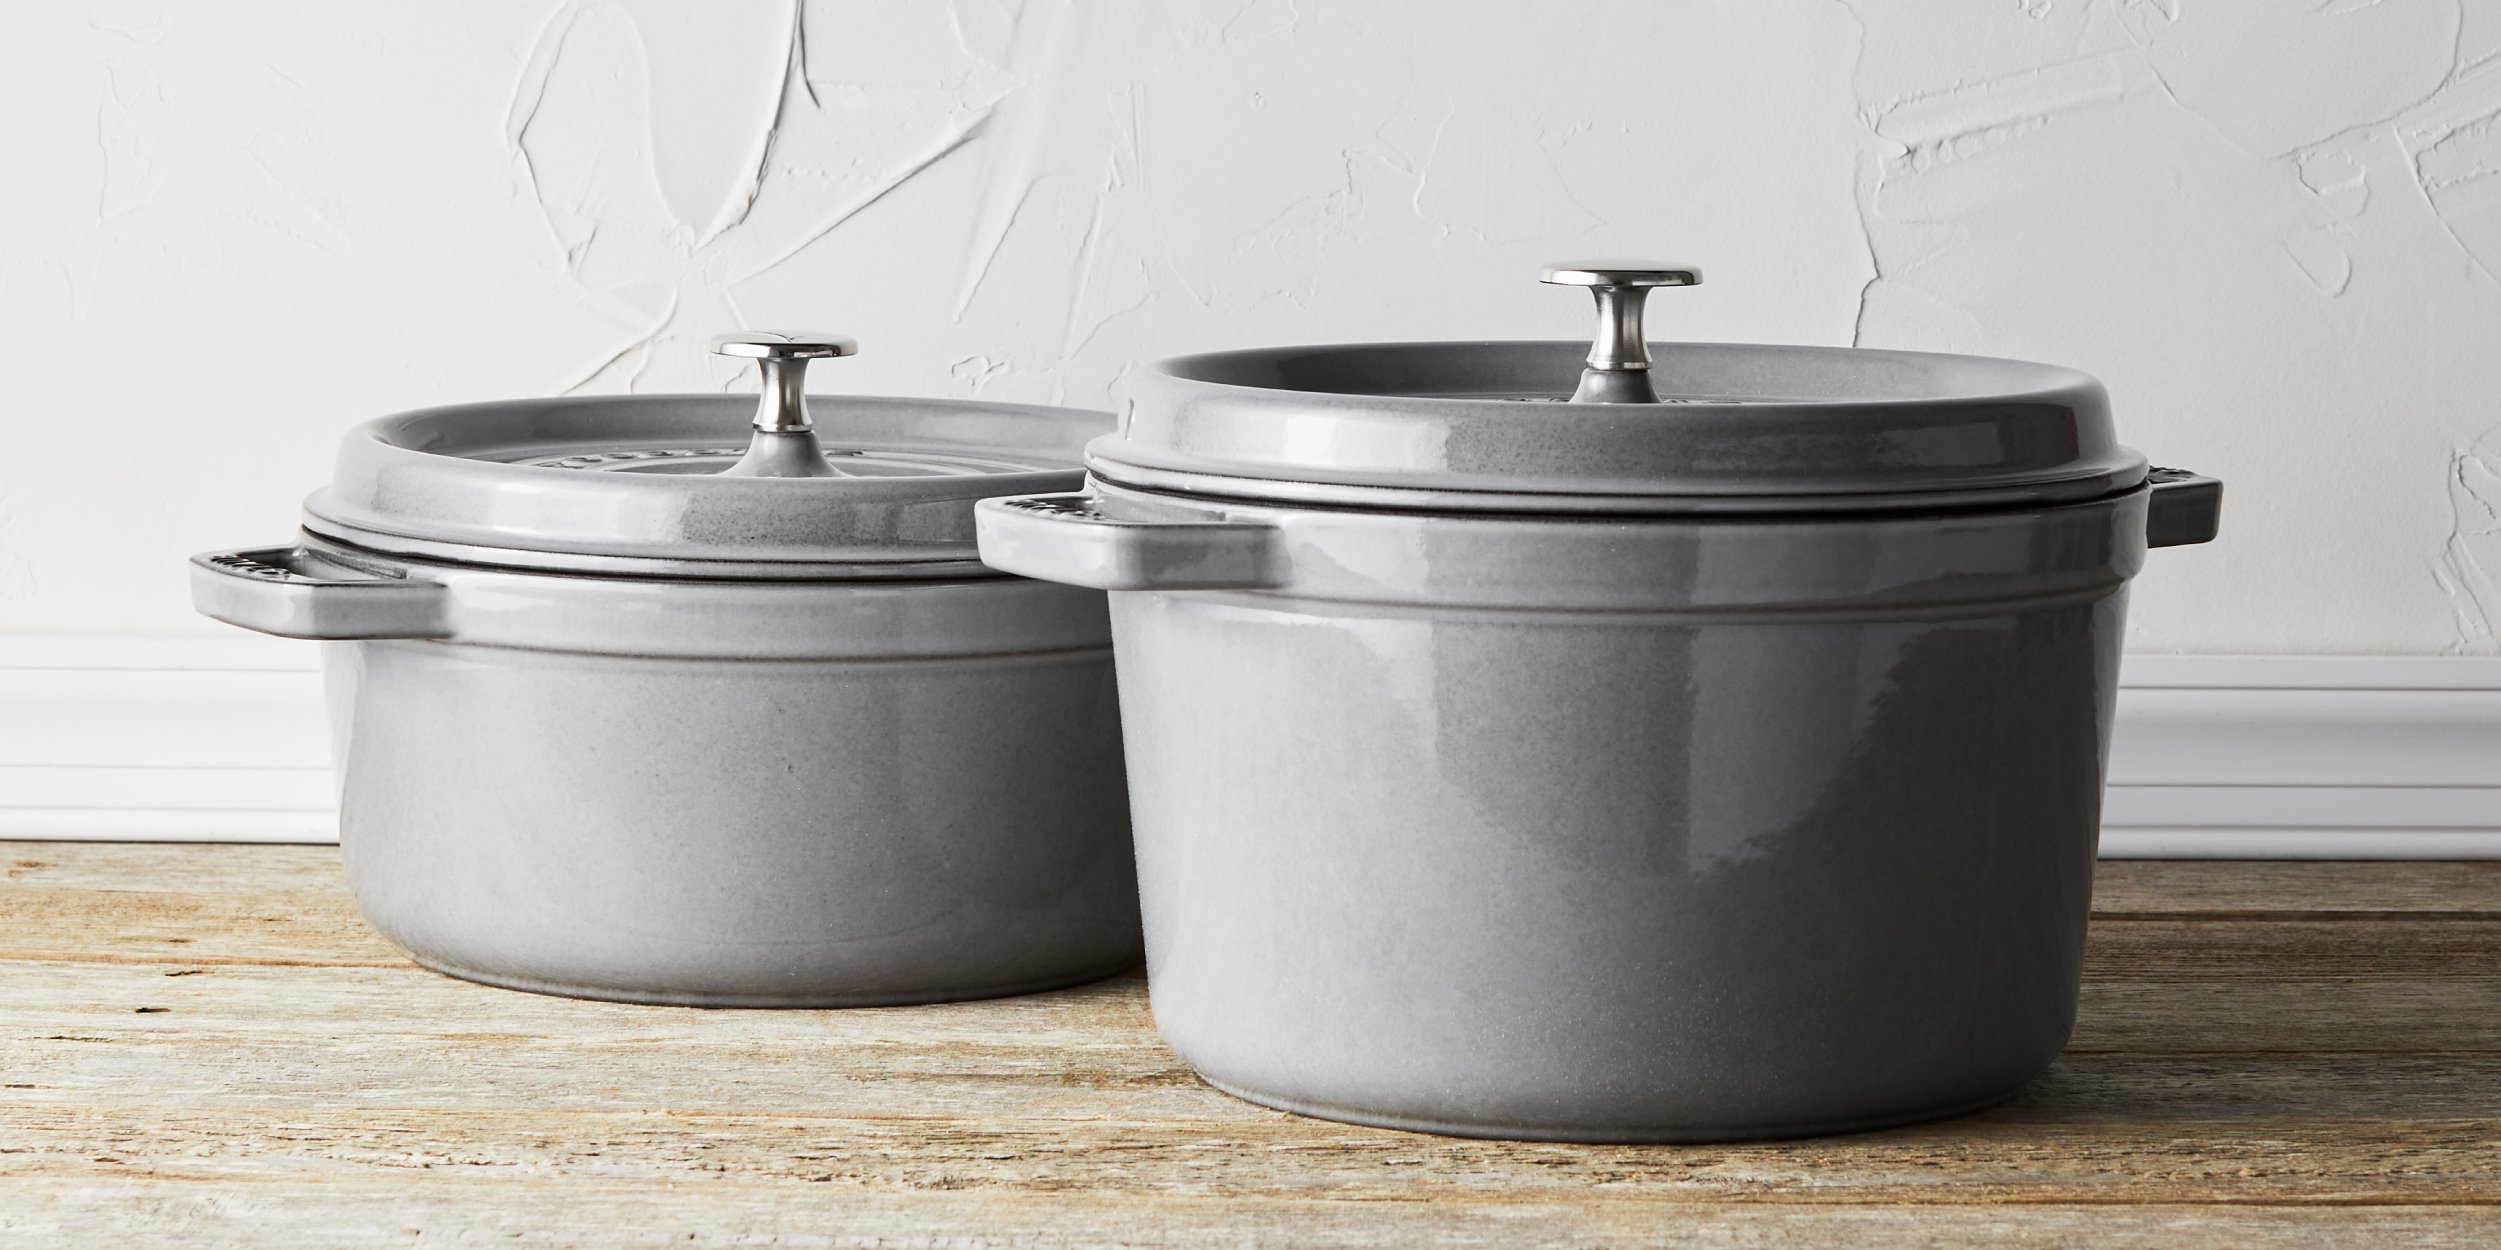 https://www.zwilling.com/on/demandware.static/-/Sites-zwilling-us-Library/default/dwf13dfad3/images/product-content/masonry-content/staub/cast-iron/cocotte/TallCocottes_Mason_Comp_1200-600_TallCocotteMasonry.jpg